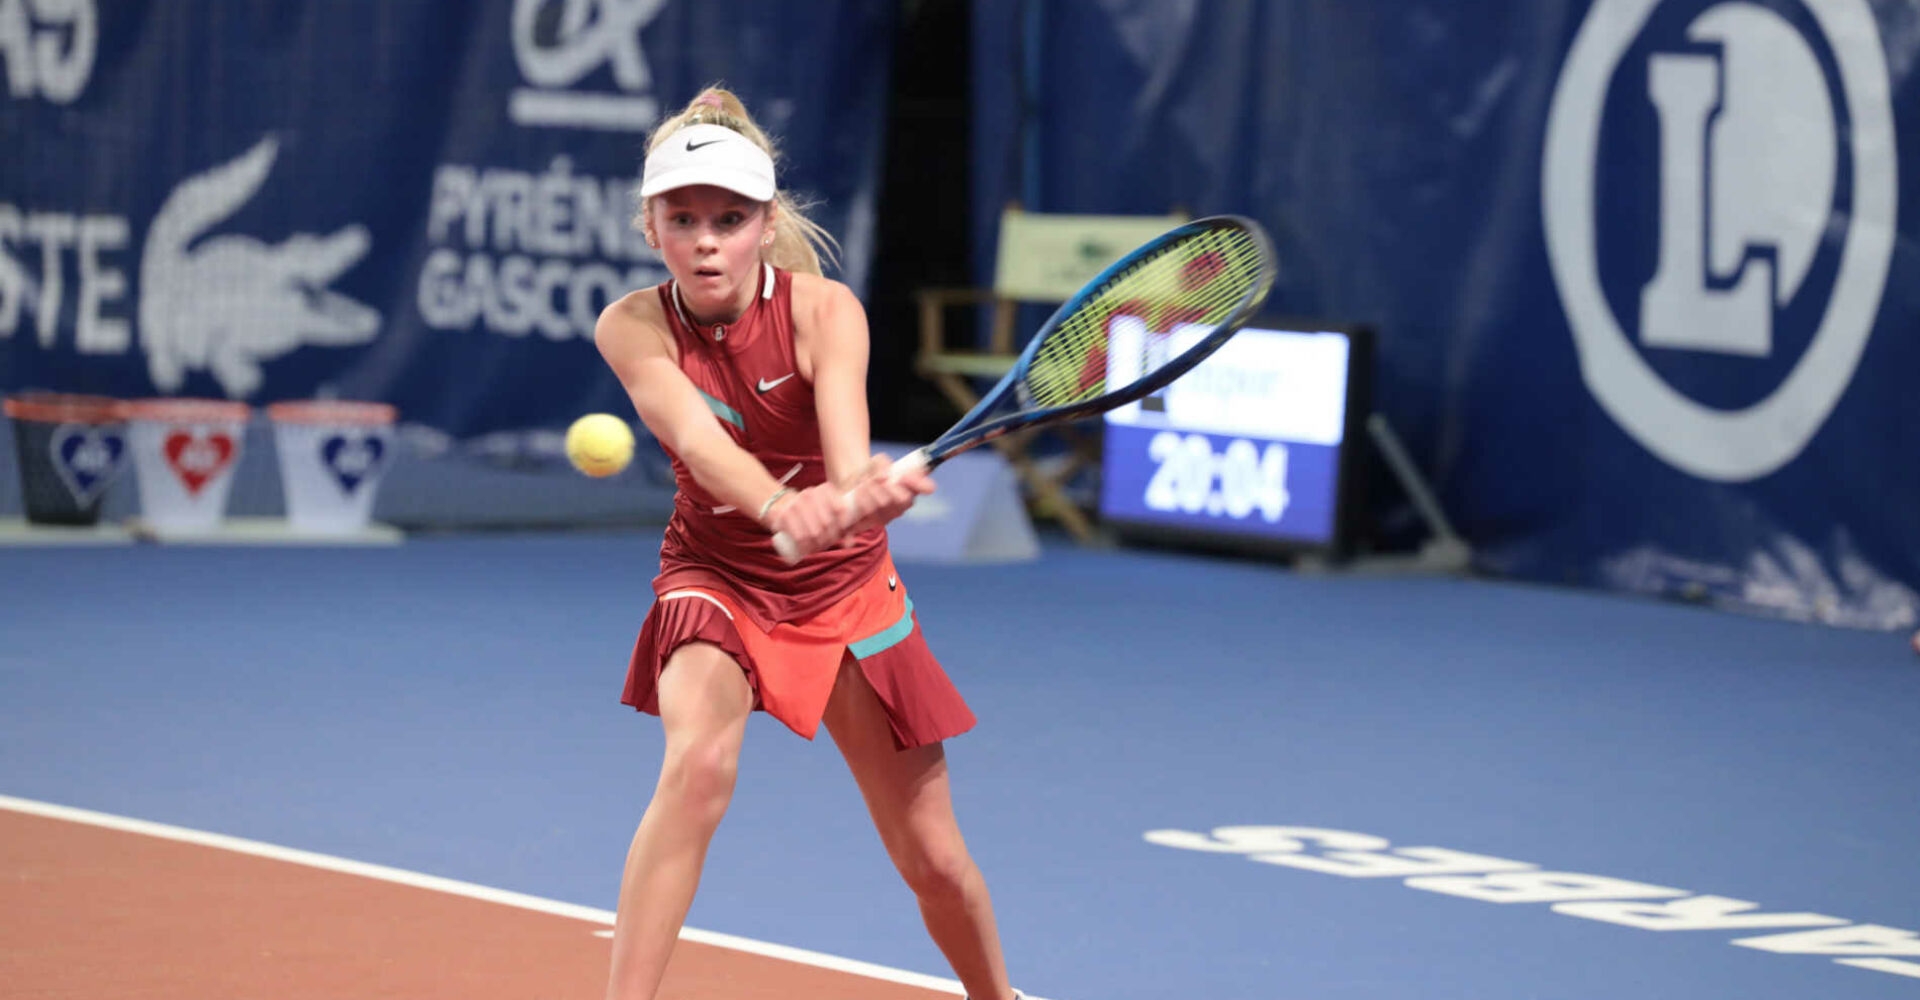 Tennis Player fields announced for 2022 Tennis Europe Junior Masters